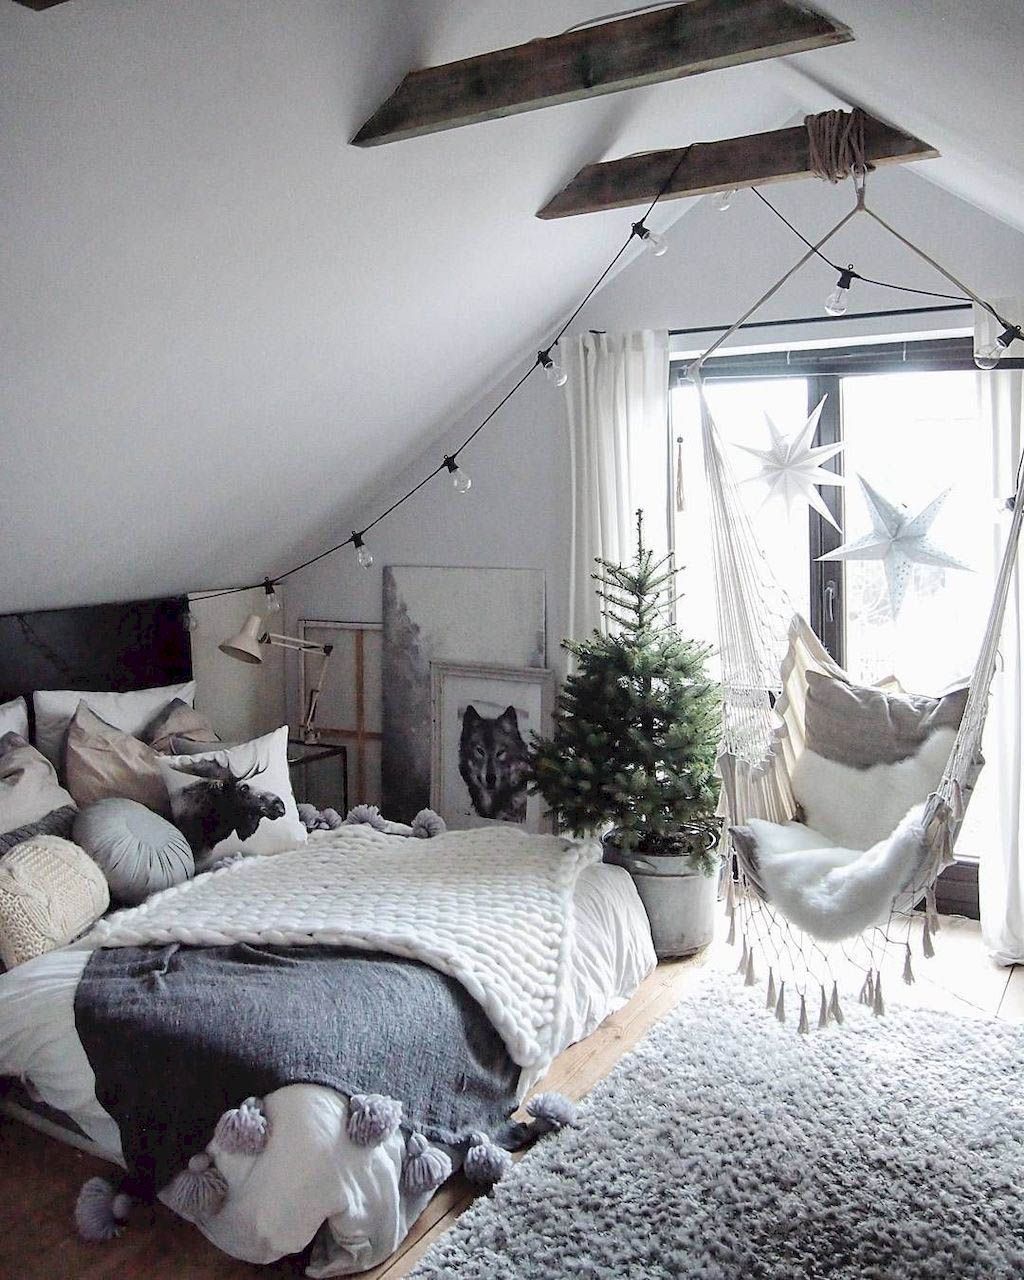 Transform Your Teen’s Bedroom with These
Inspiring Ideas